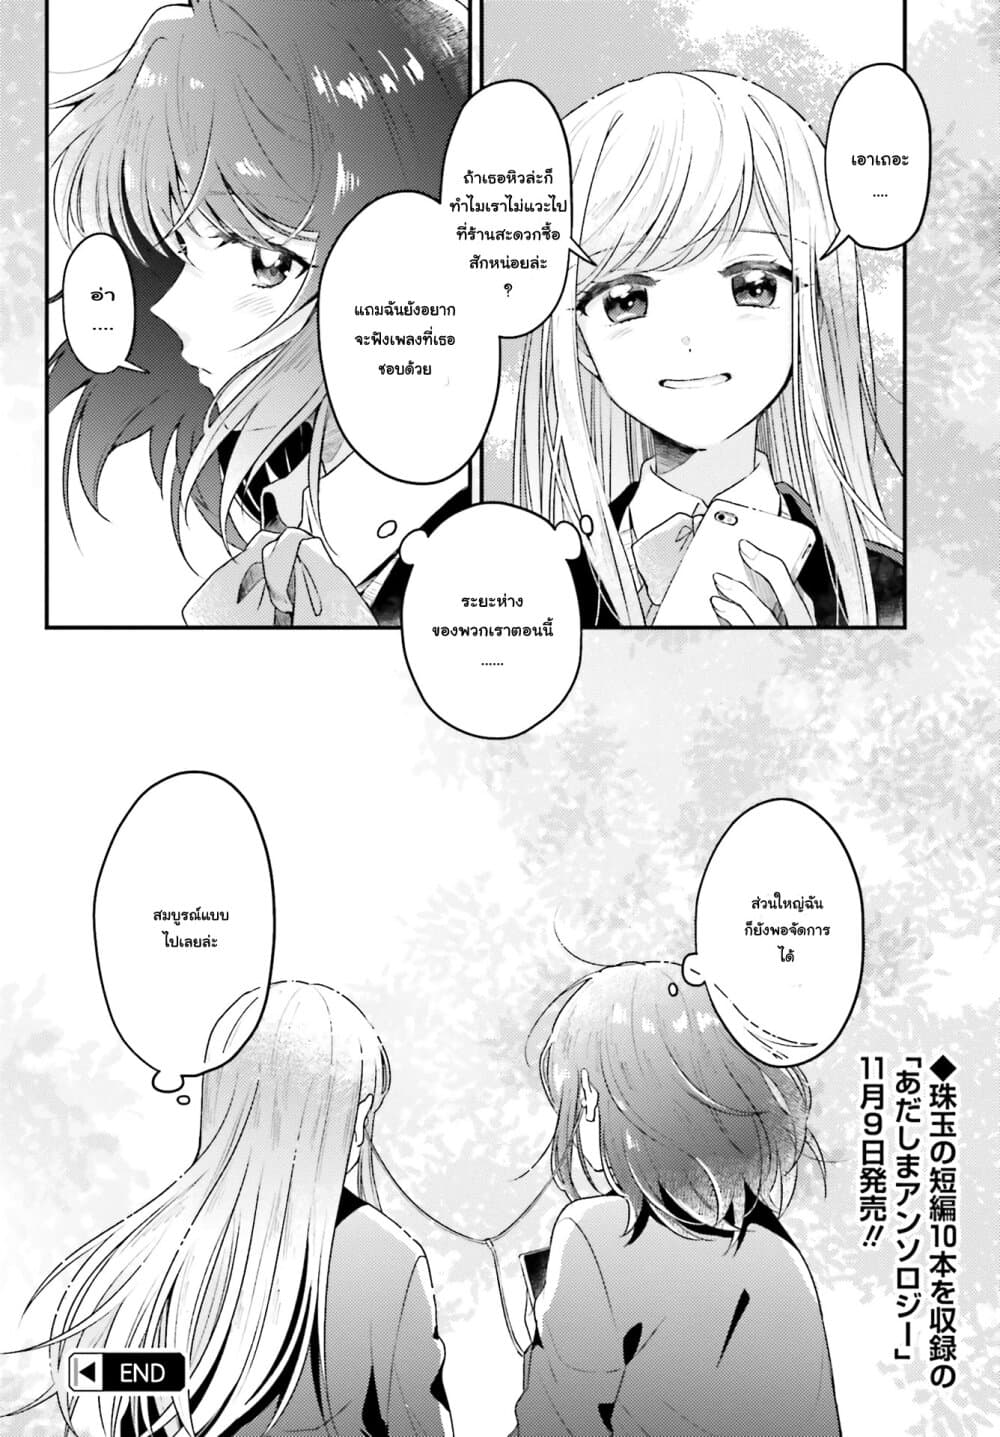 Adachi-to-Shimamura-Official-Comic-Anthology-Chapter2-12.jpg